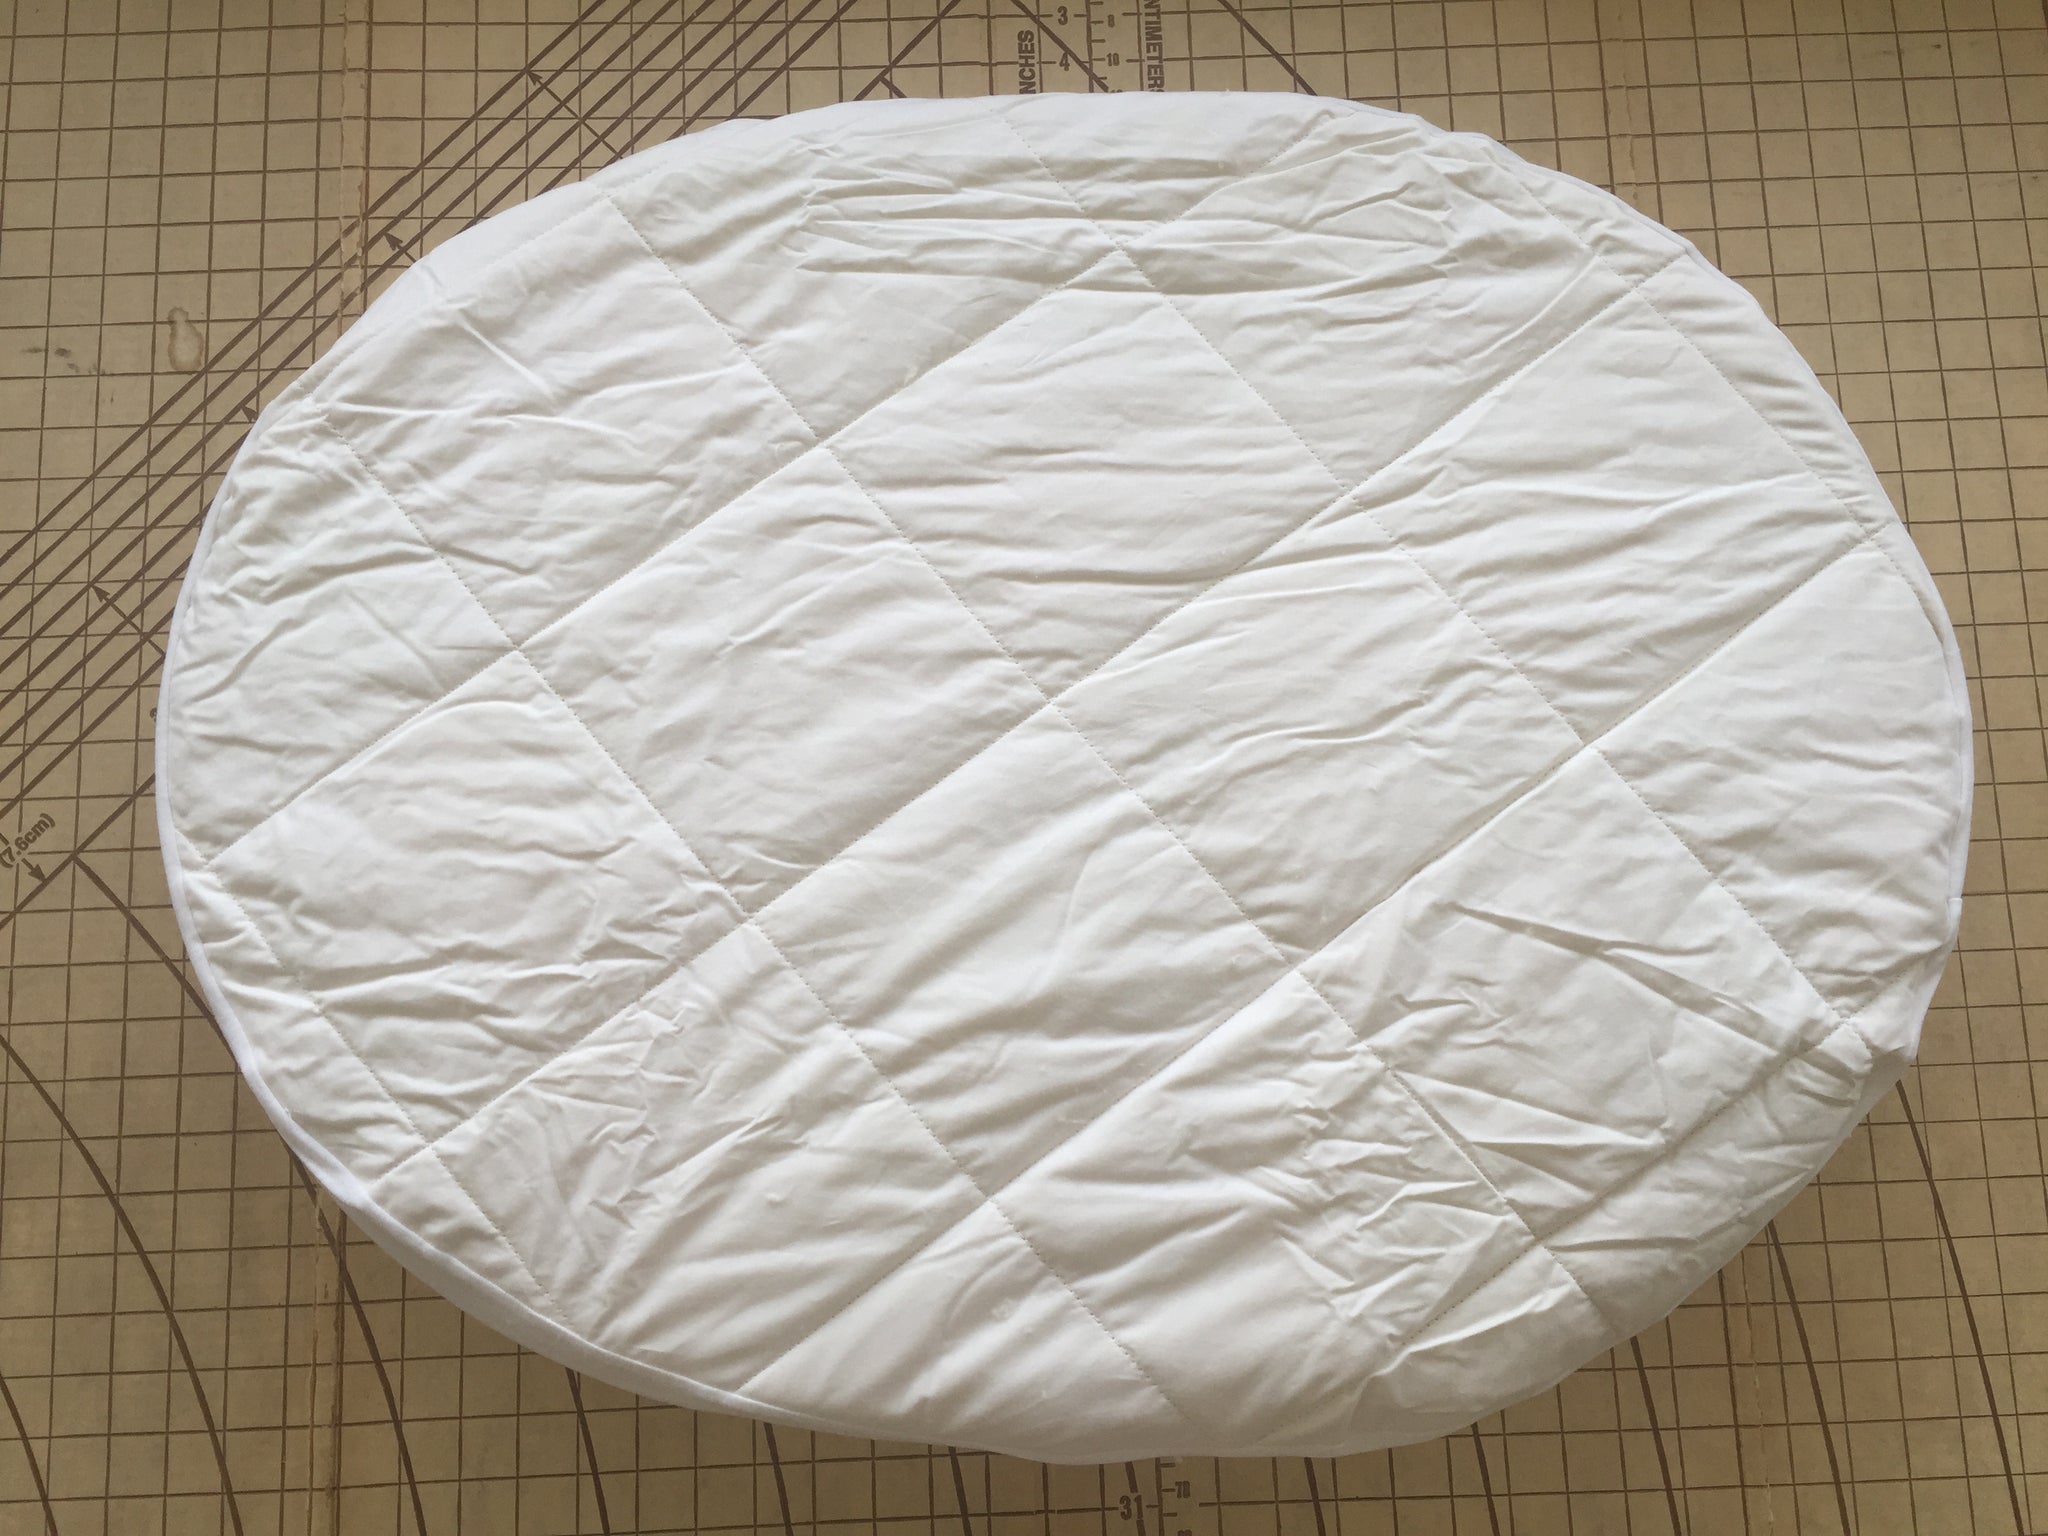 Stokke Sleepi cot 100% cotton quilted mattress protector